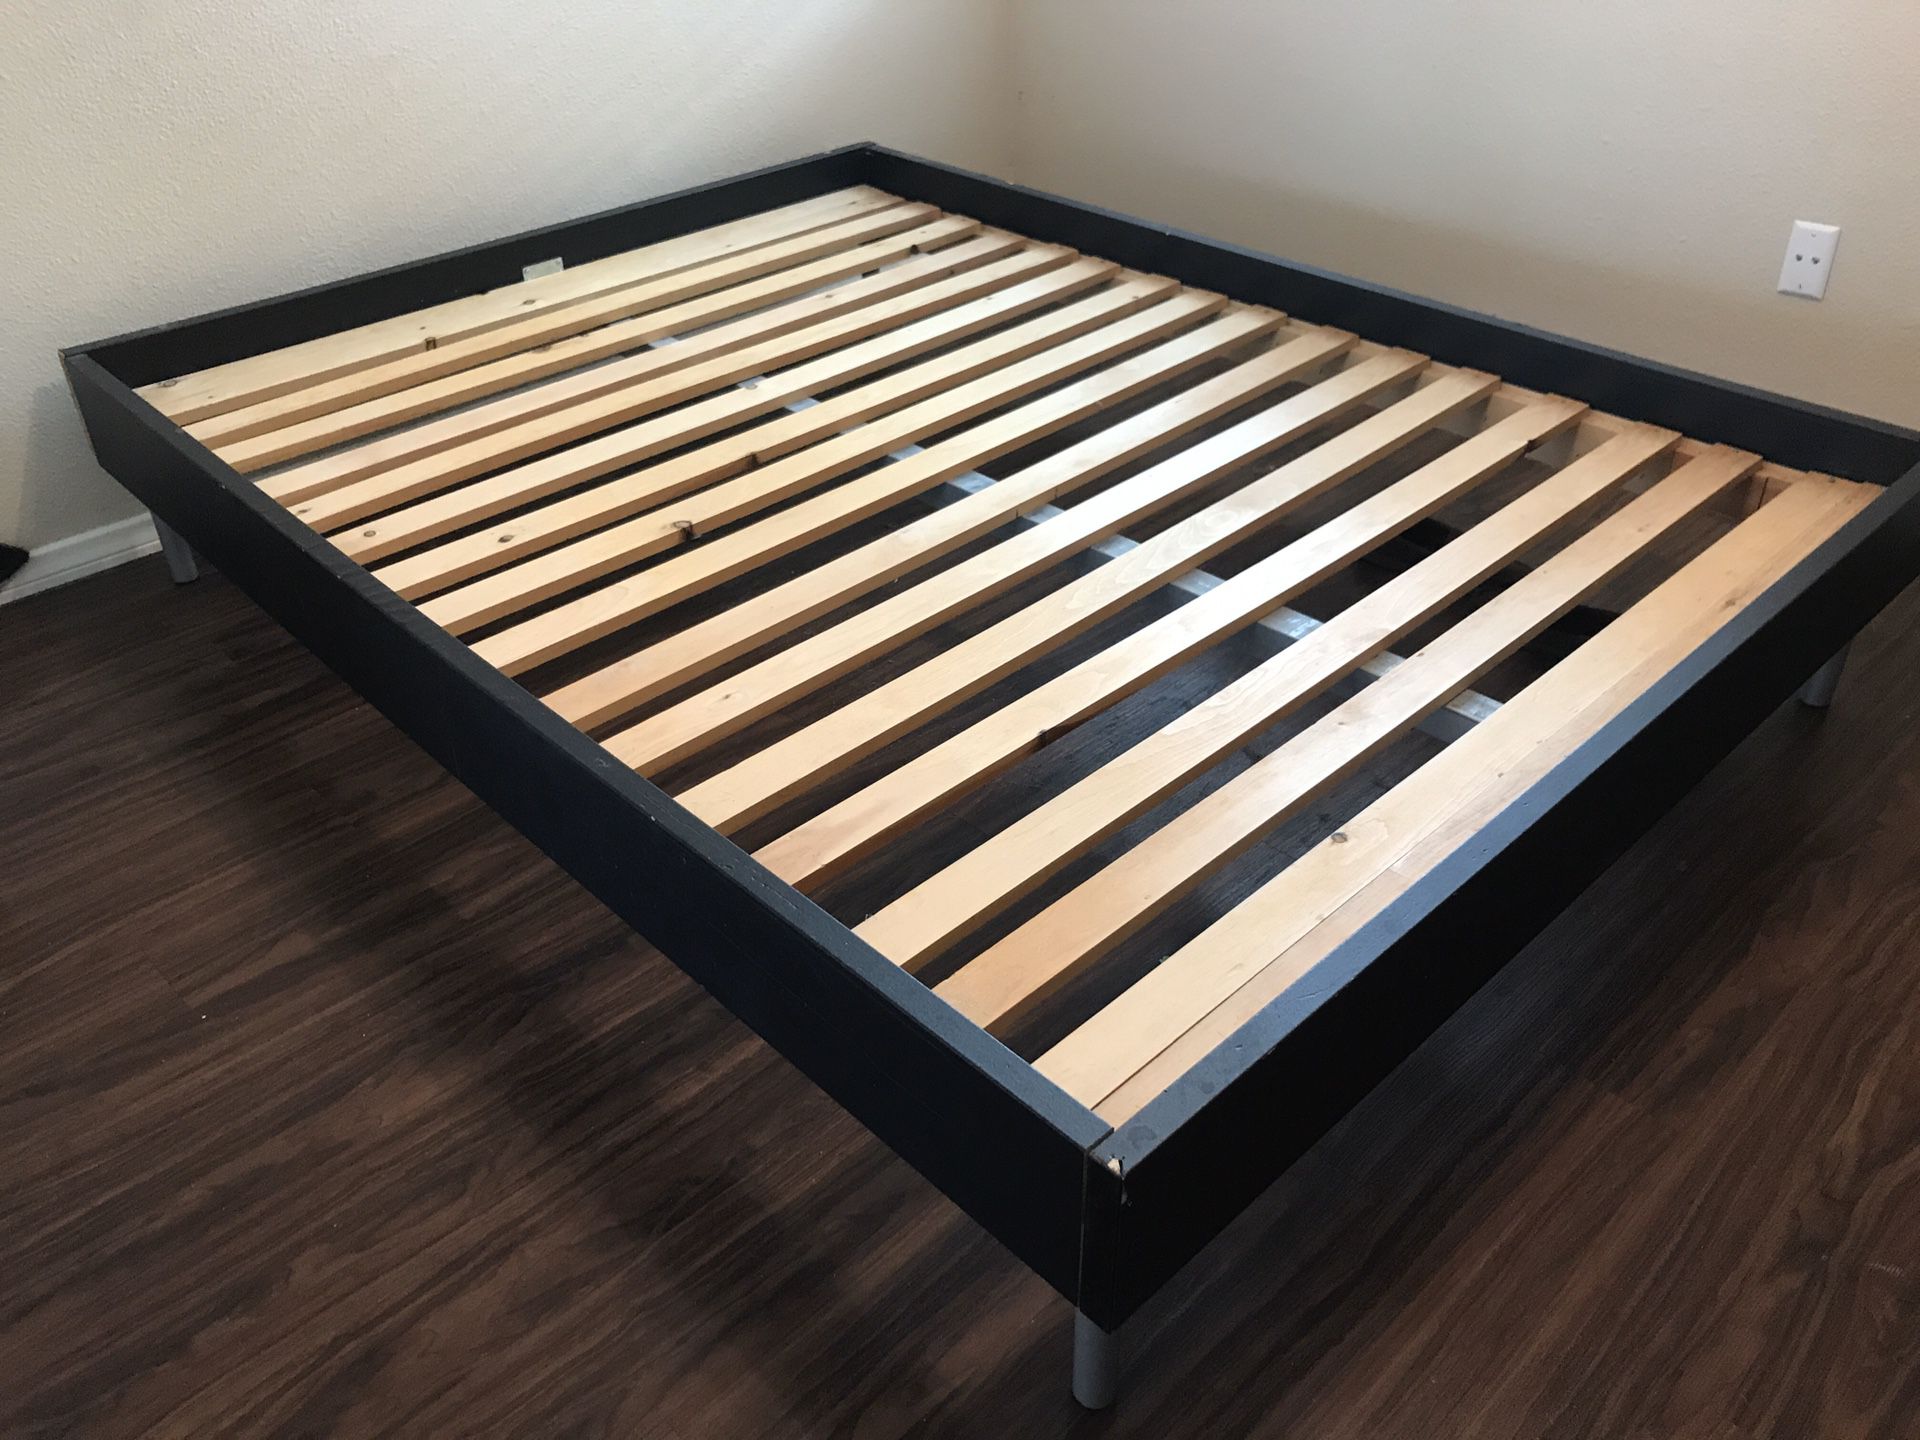 Queen sized bed frame